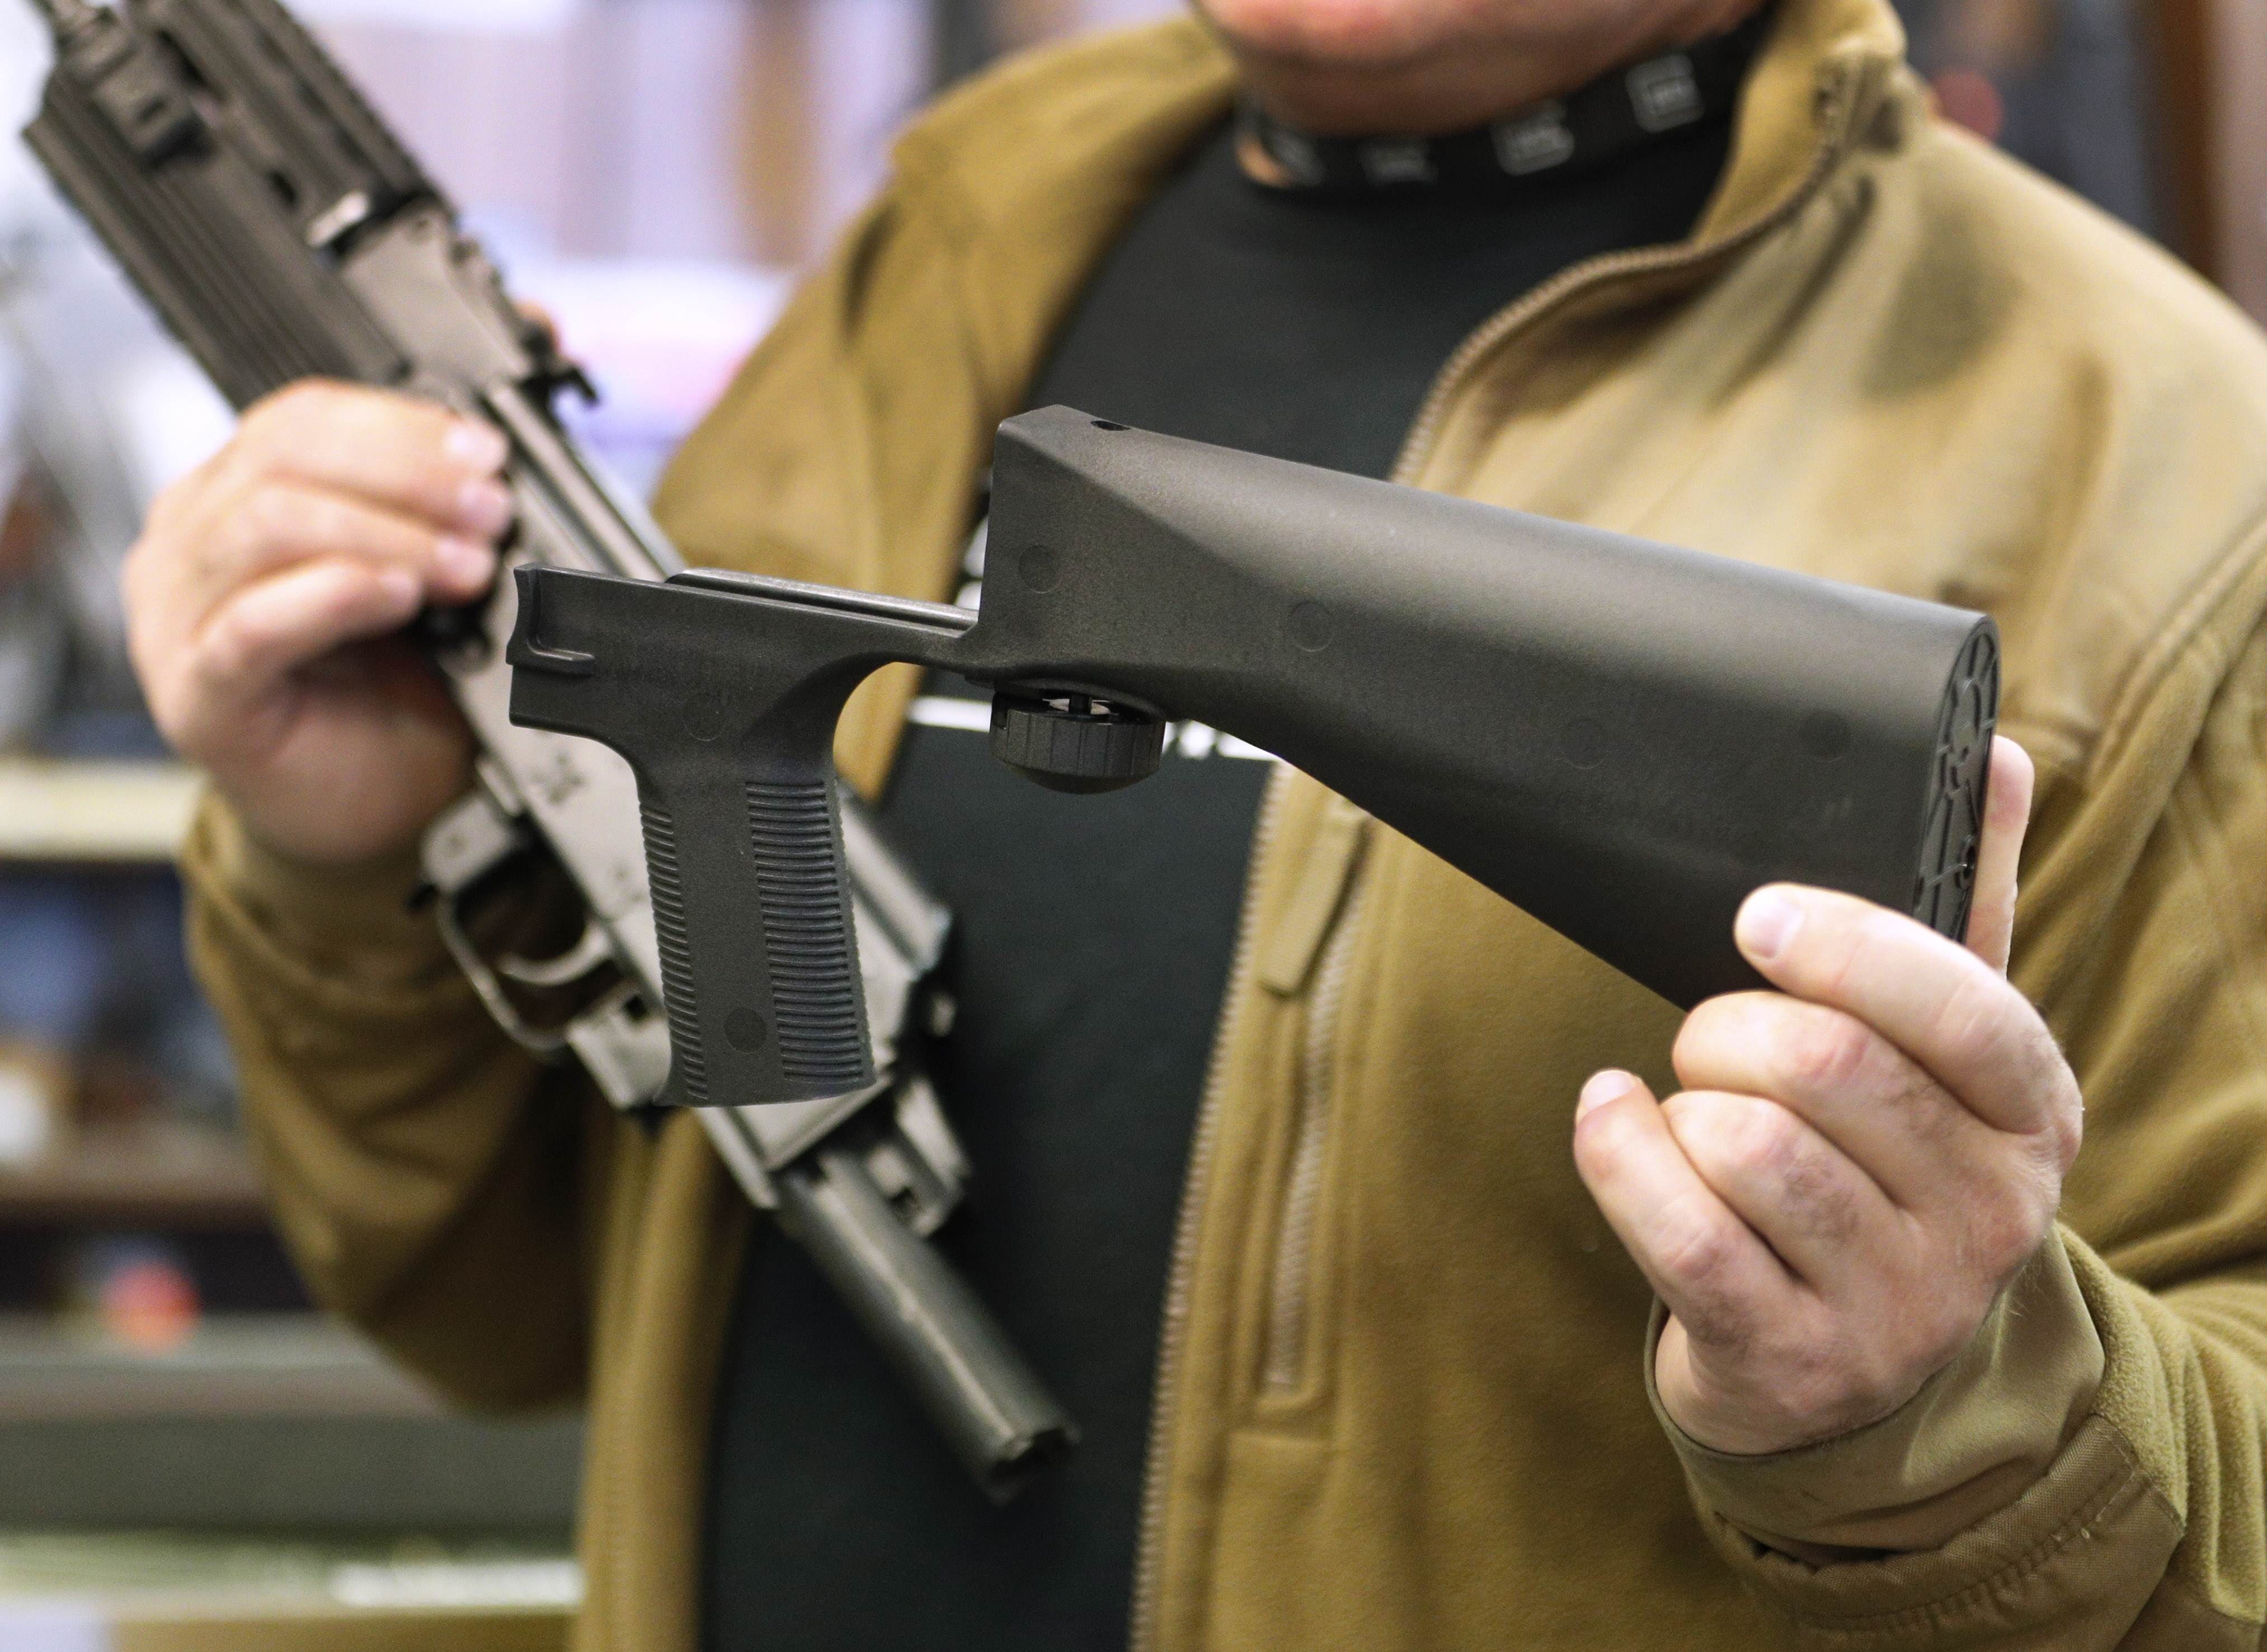 A bump stock device (right), that fits on a semi-automatic rifle to increase the firing speed, making it similar to a fully automatic rifle, is shown next to a AK-47 semi-automatic rifle at a gun store in Salt Lake City, Utah. Photo: Agence France-Presse